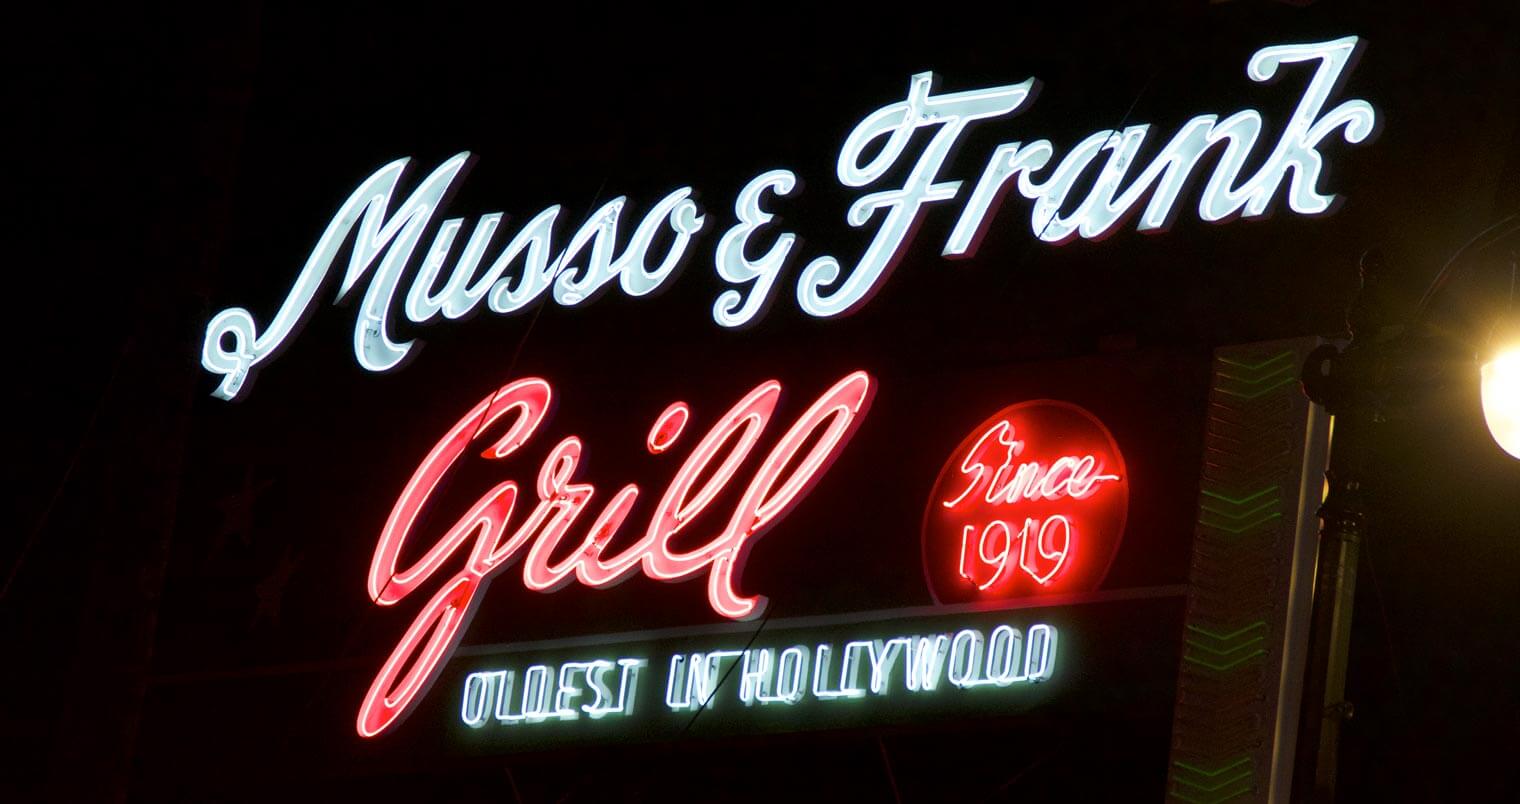 Musso & Frank Grill, outdoor neon sign, featured image